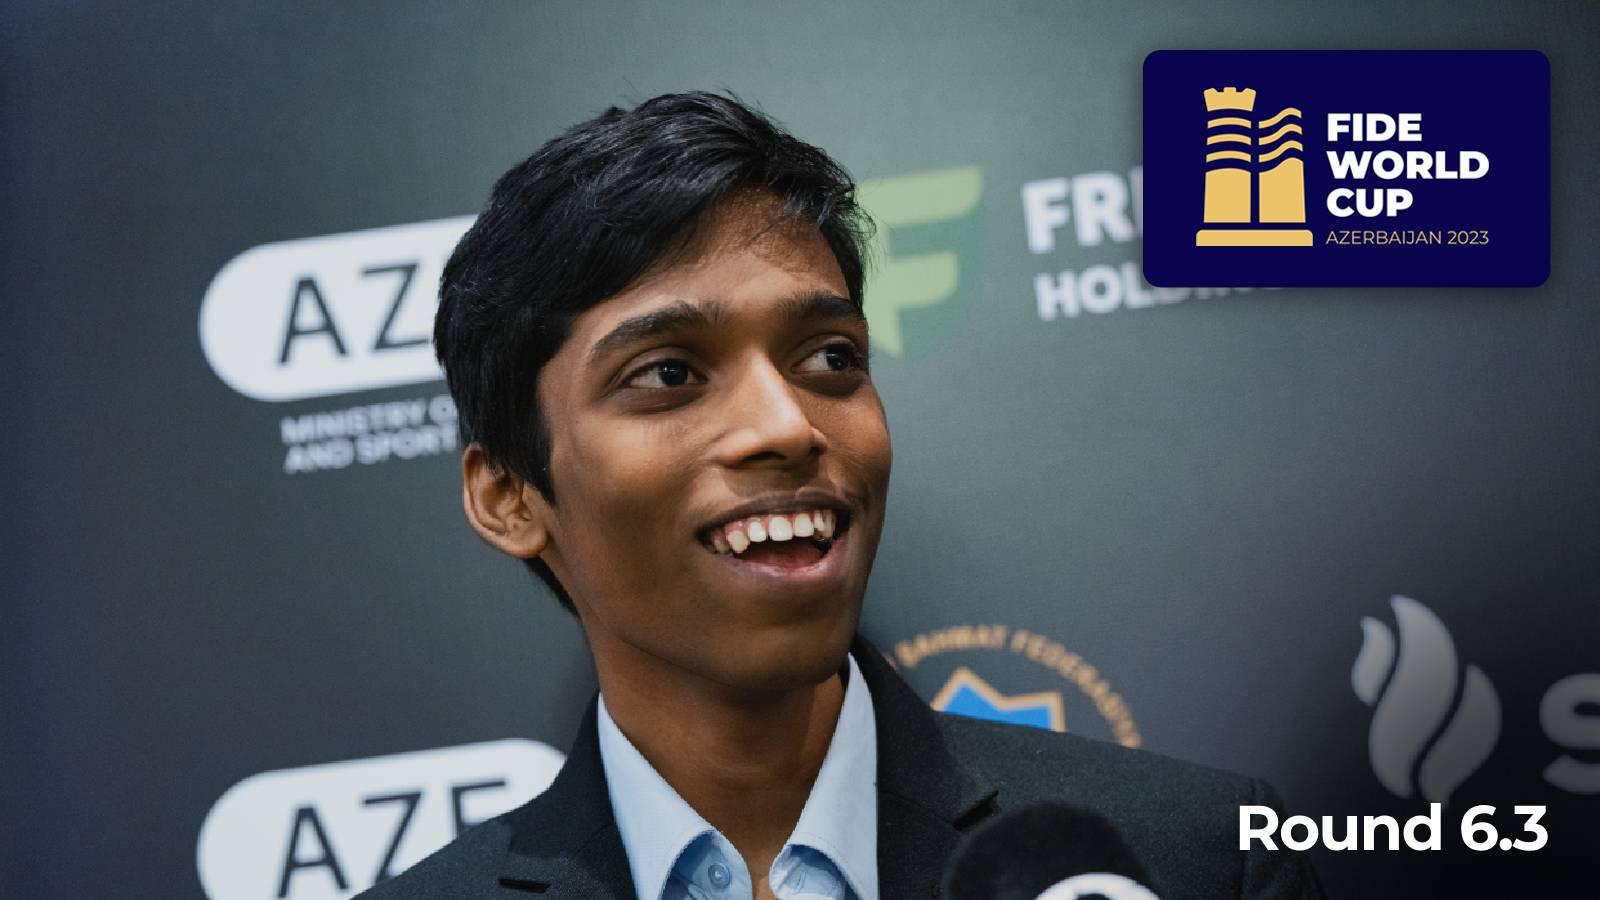 FIDE World Chess Cup 2023: the most intense super-GM tournament is